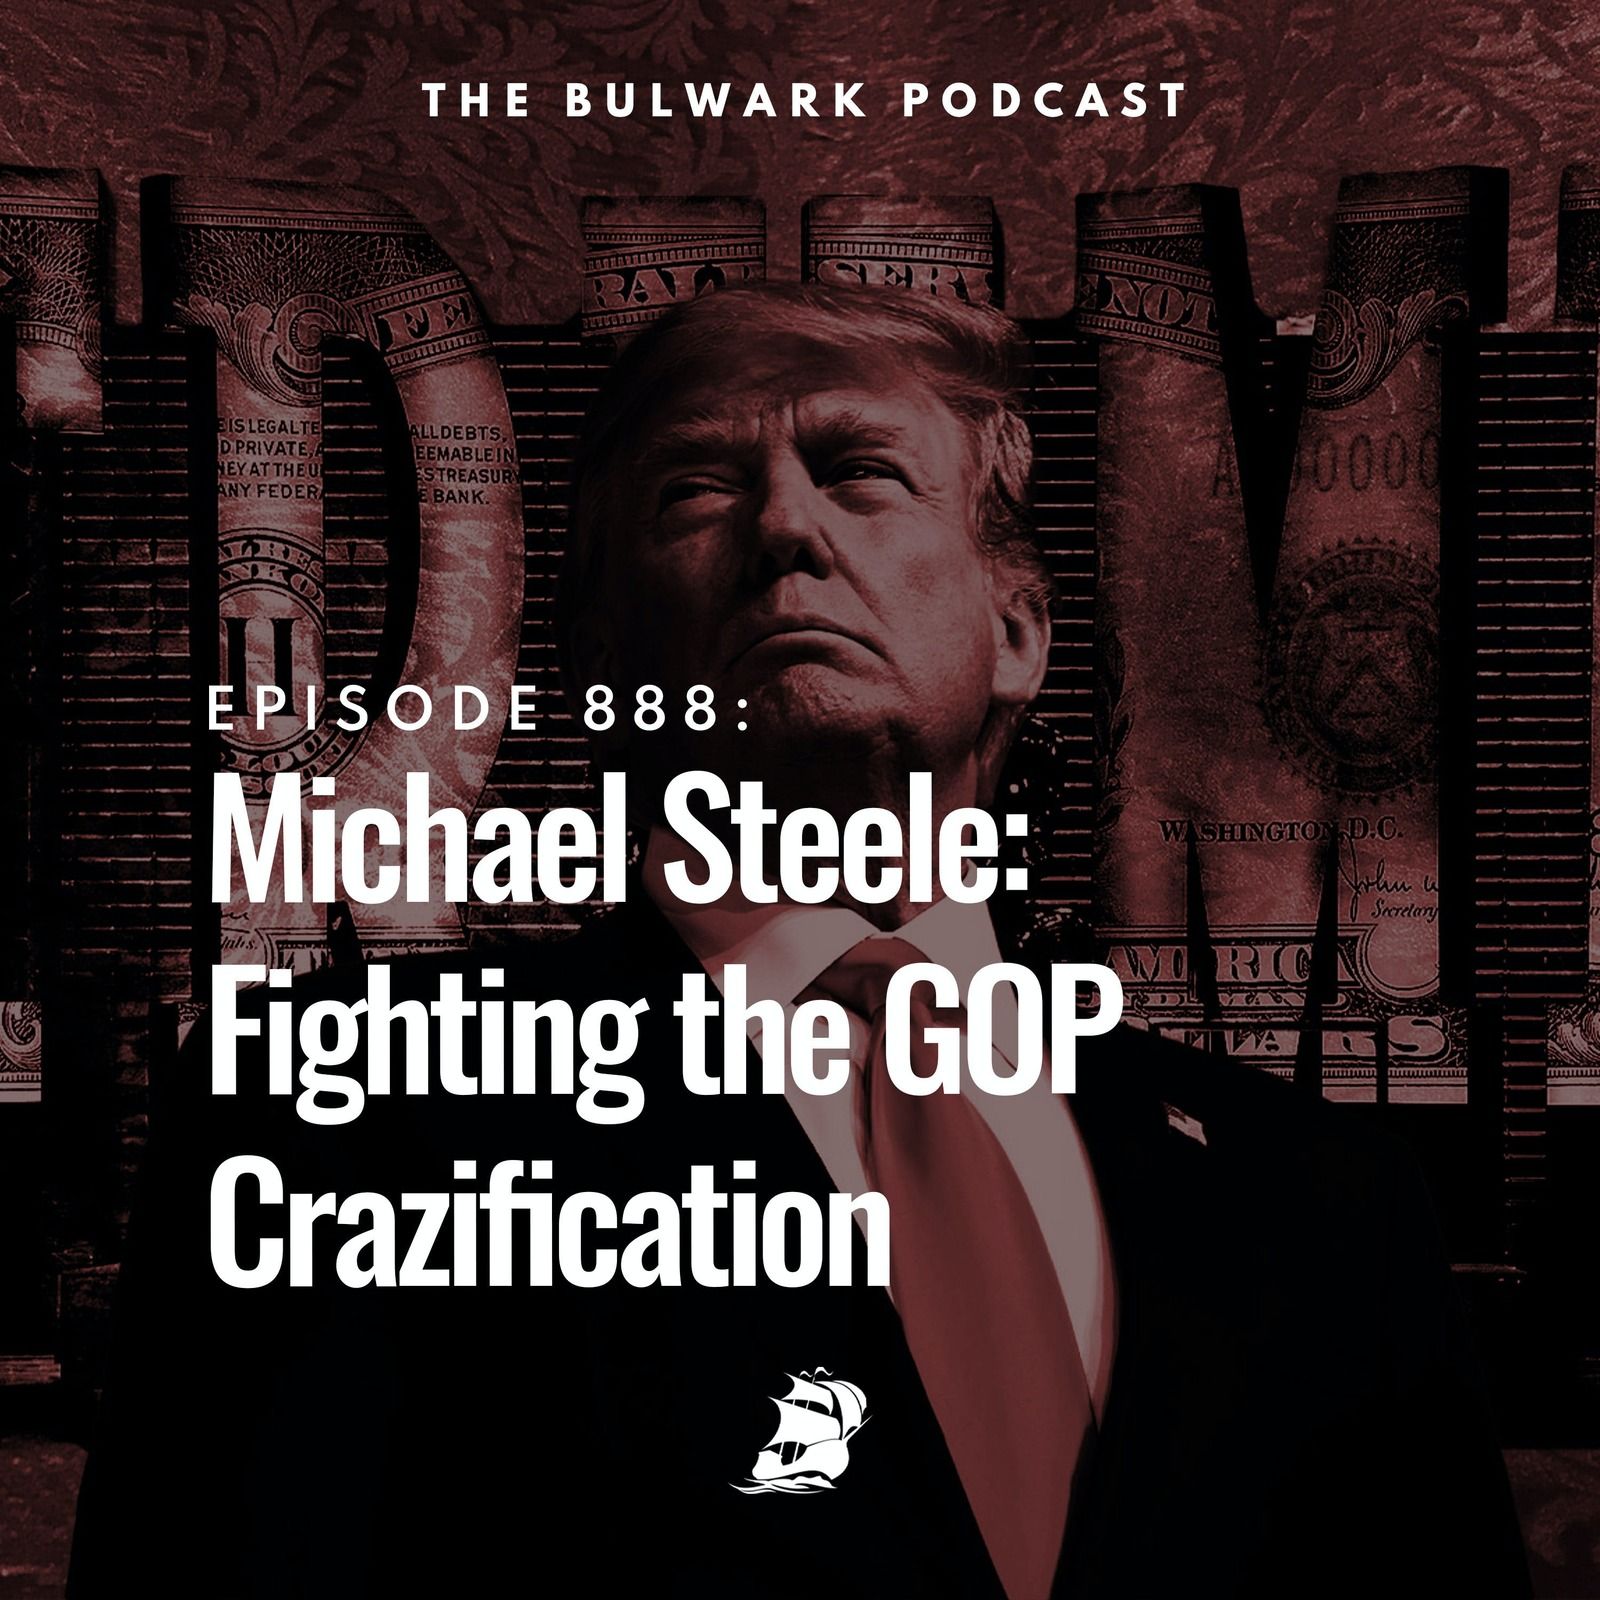 Michael Steele: Fighting the GOP Crazification by The Bulwark Podcast